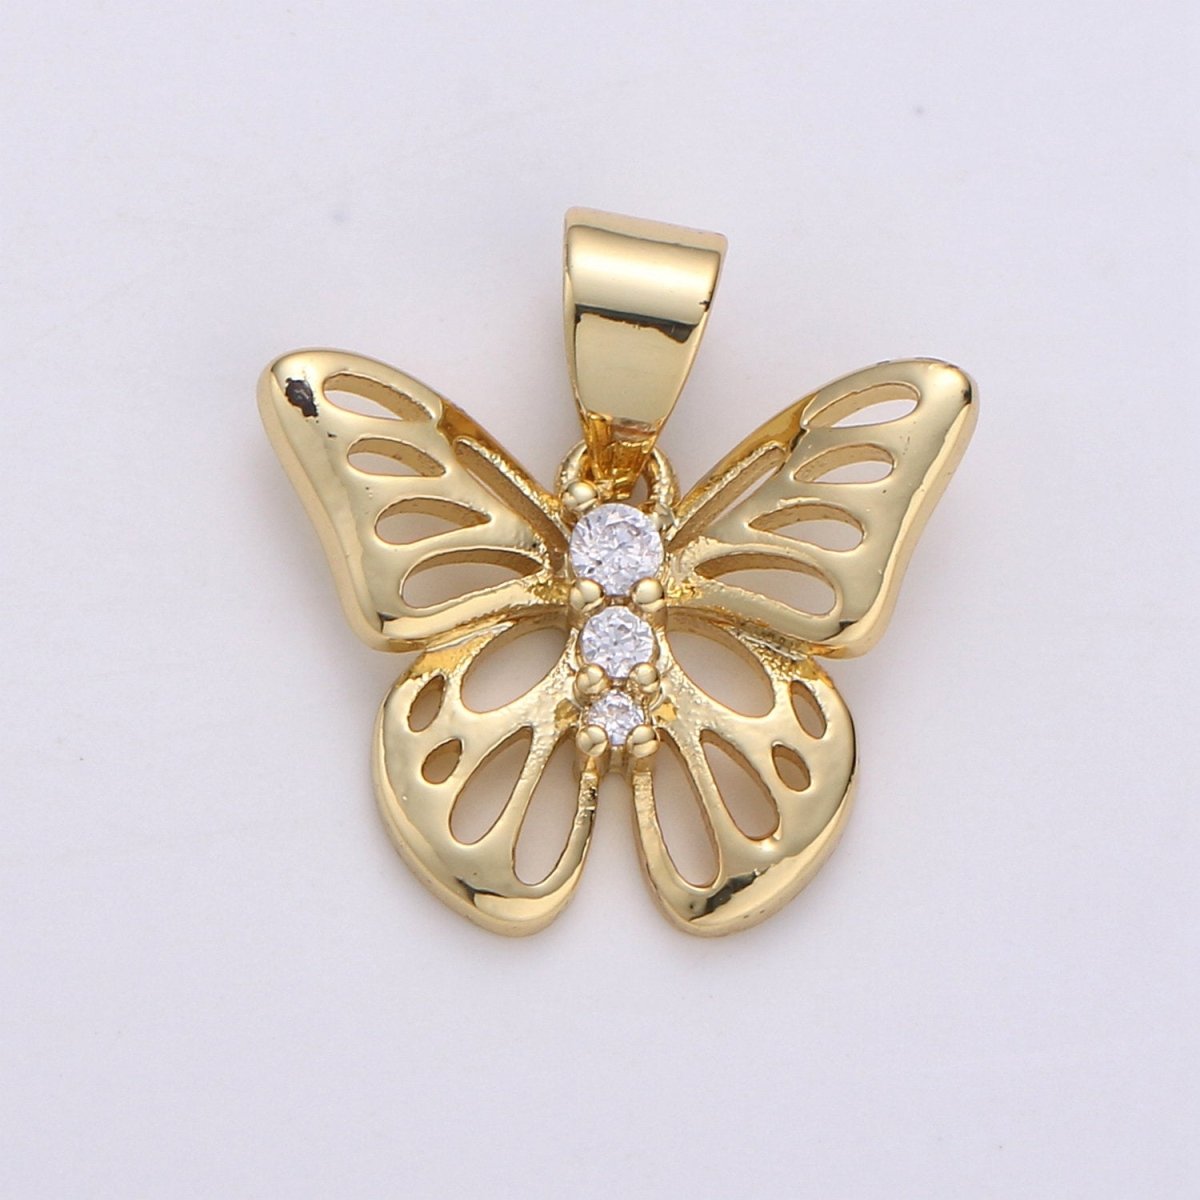 11mm Butterfly Charm Micro Pave Butterfly Charm, Past Present Future CZ in Butterfly Pendant, 14K Gold Filled Charm J-007 J-008 - DLUXCA